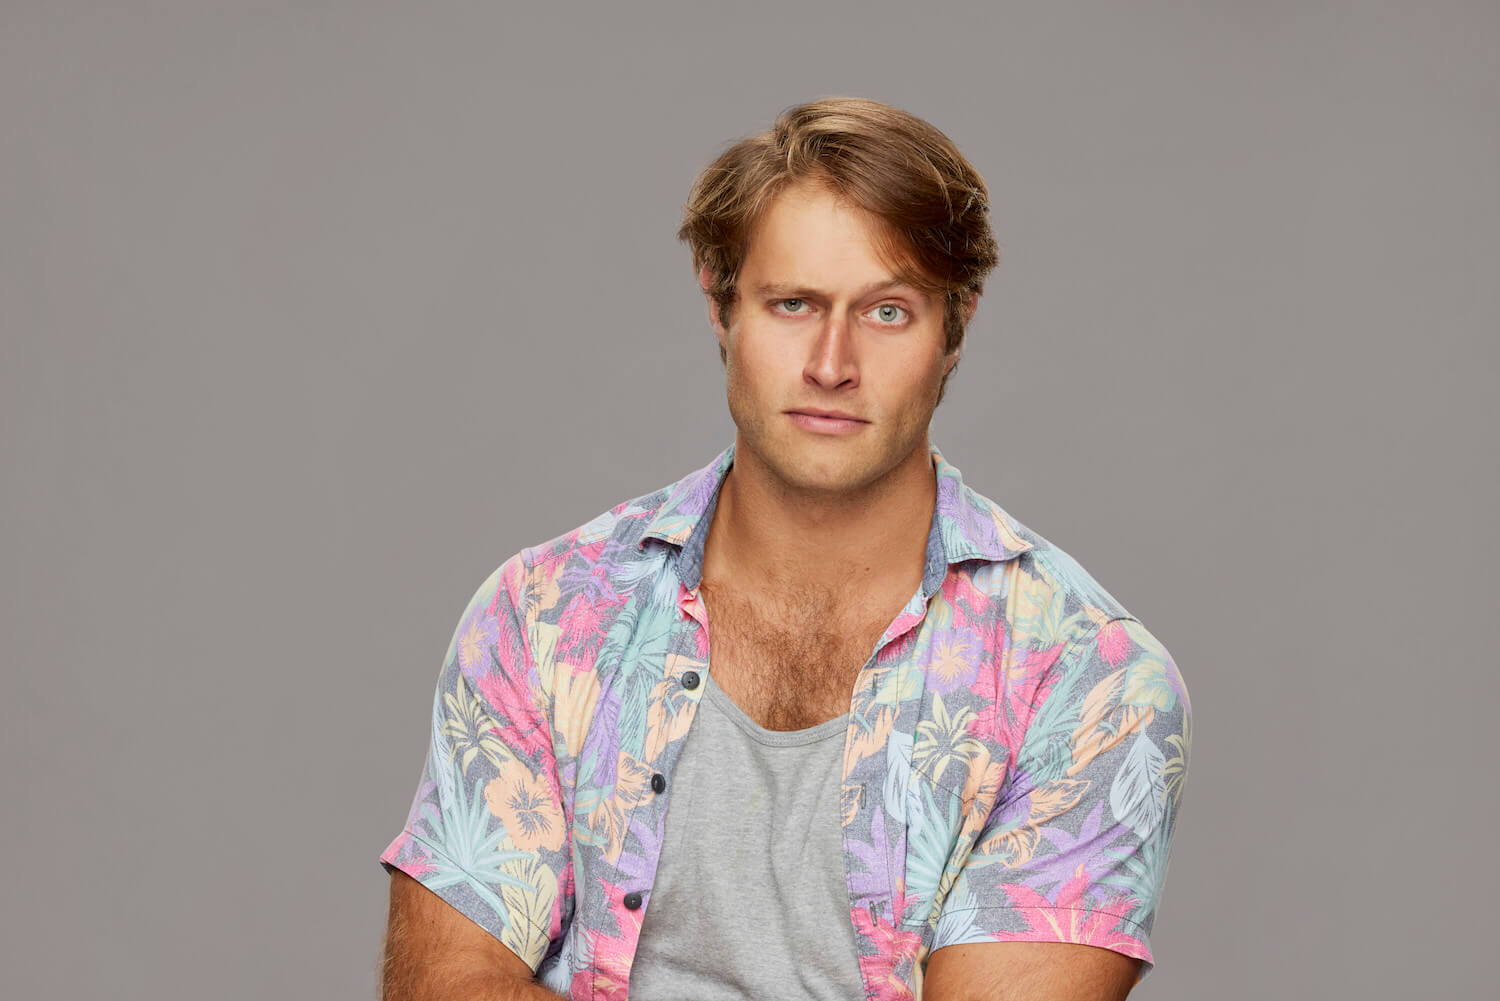 Luke Valentine from 'Big Brother' Season 25 against a gray background